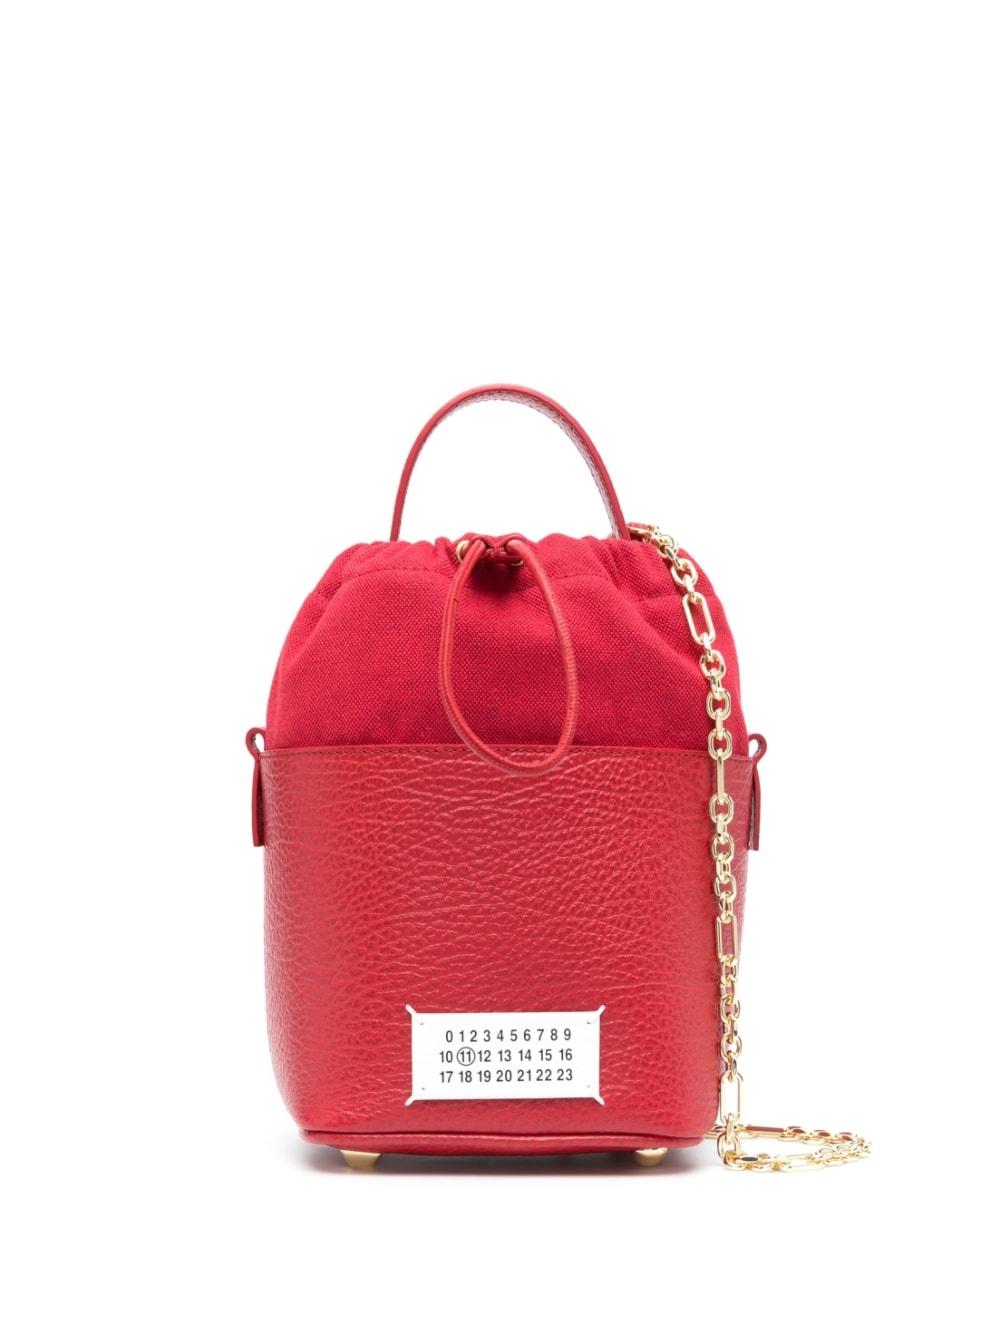 Maison Margiela Leather Bucket Bag in Red | Lyst